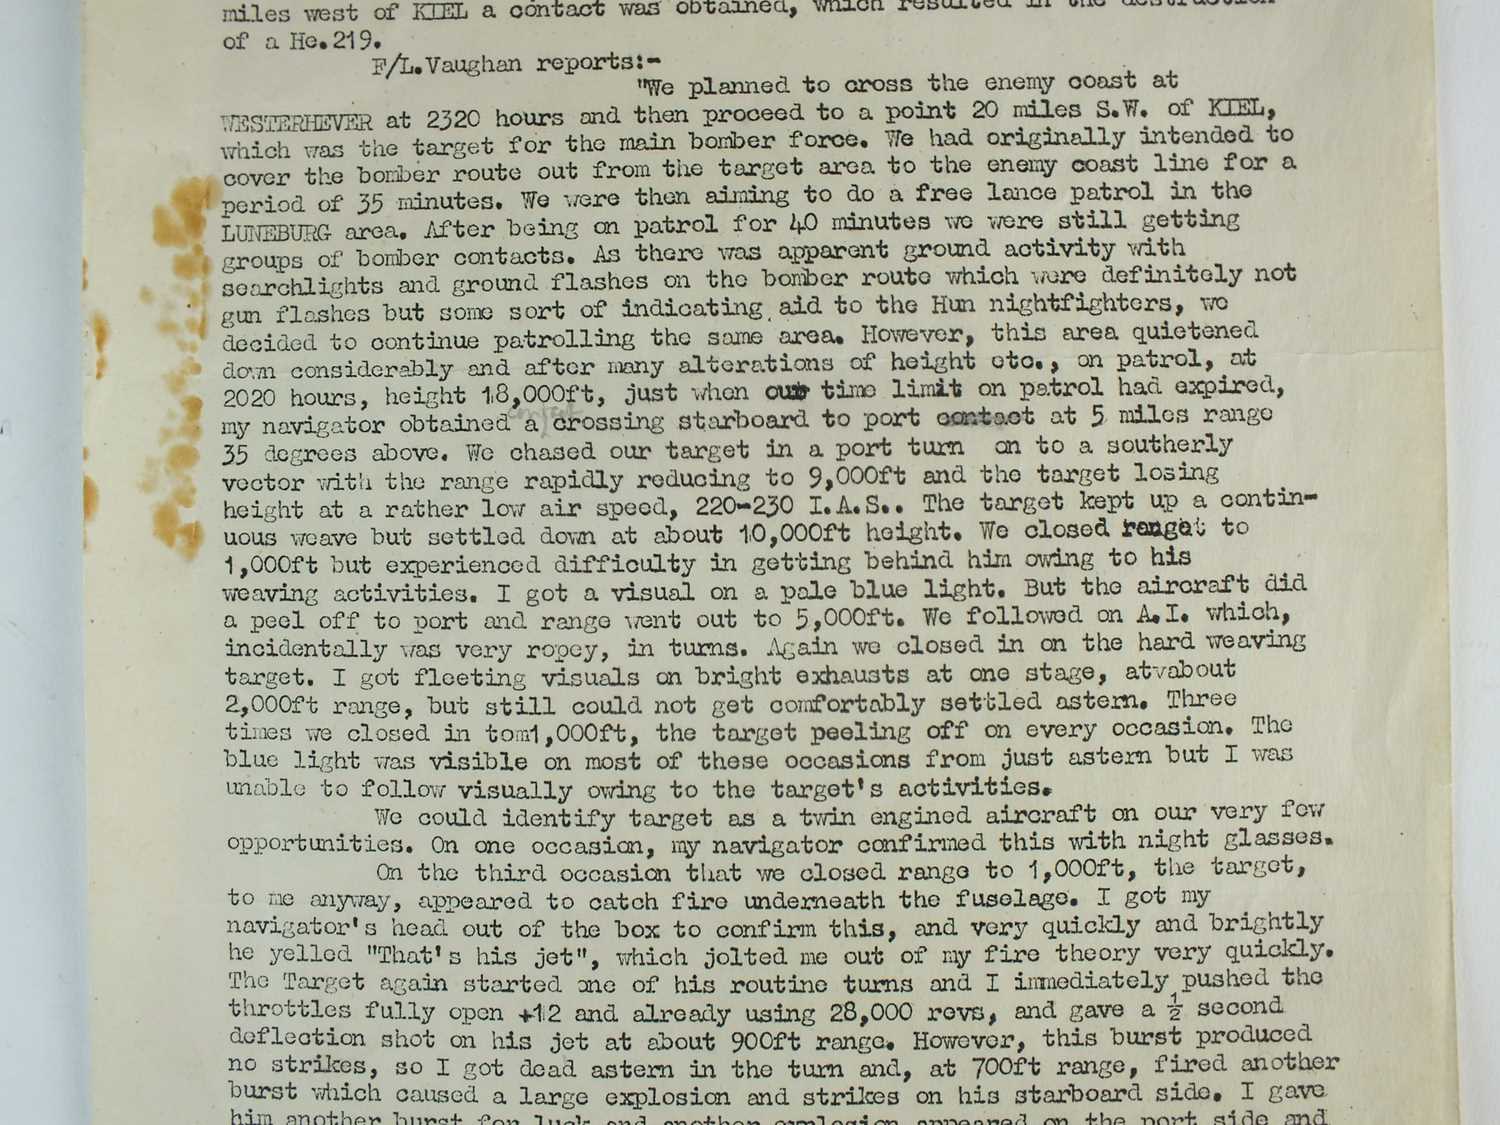 WW2 - RAF Intruder Personal Combat Report - Downed He 219 aircraft - Image 4 of 7